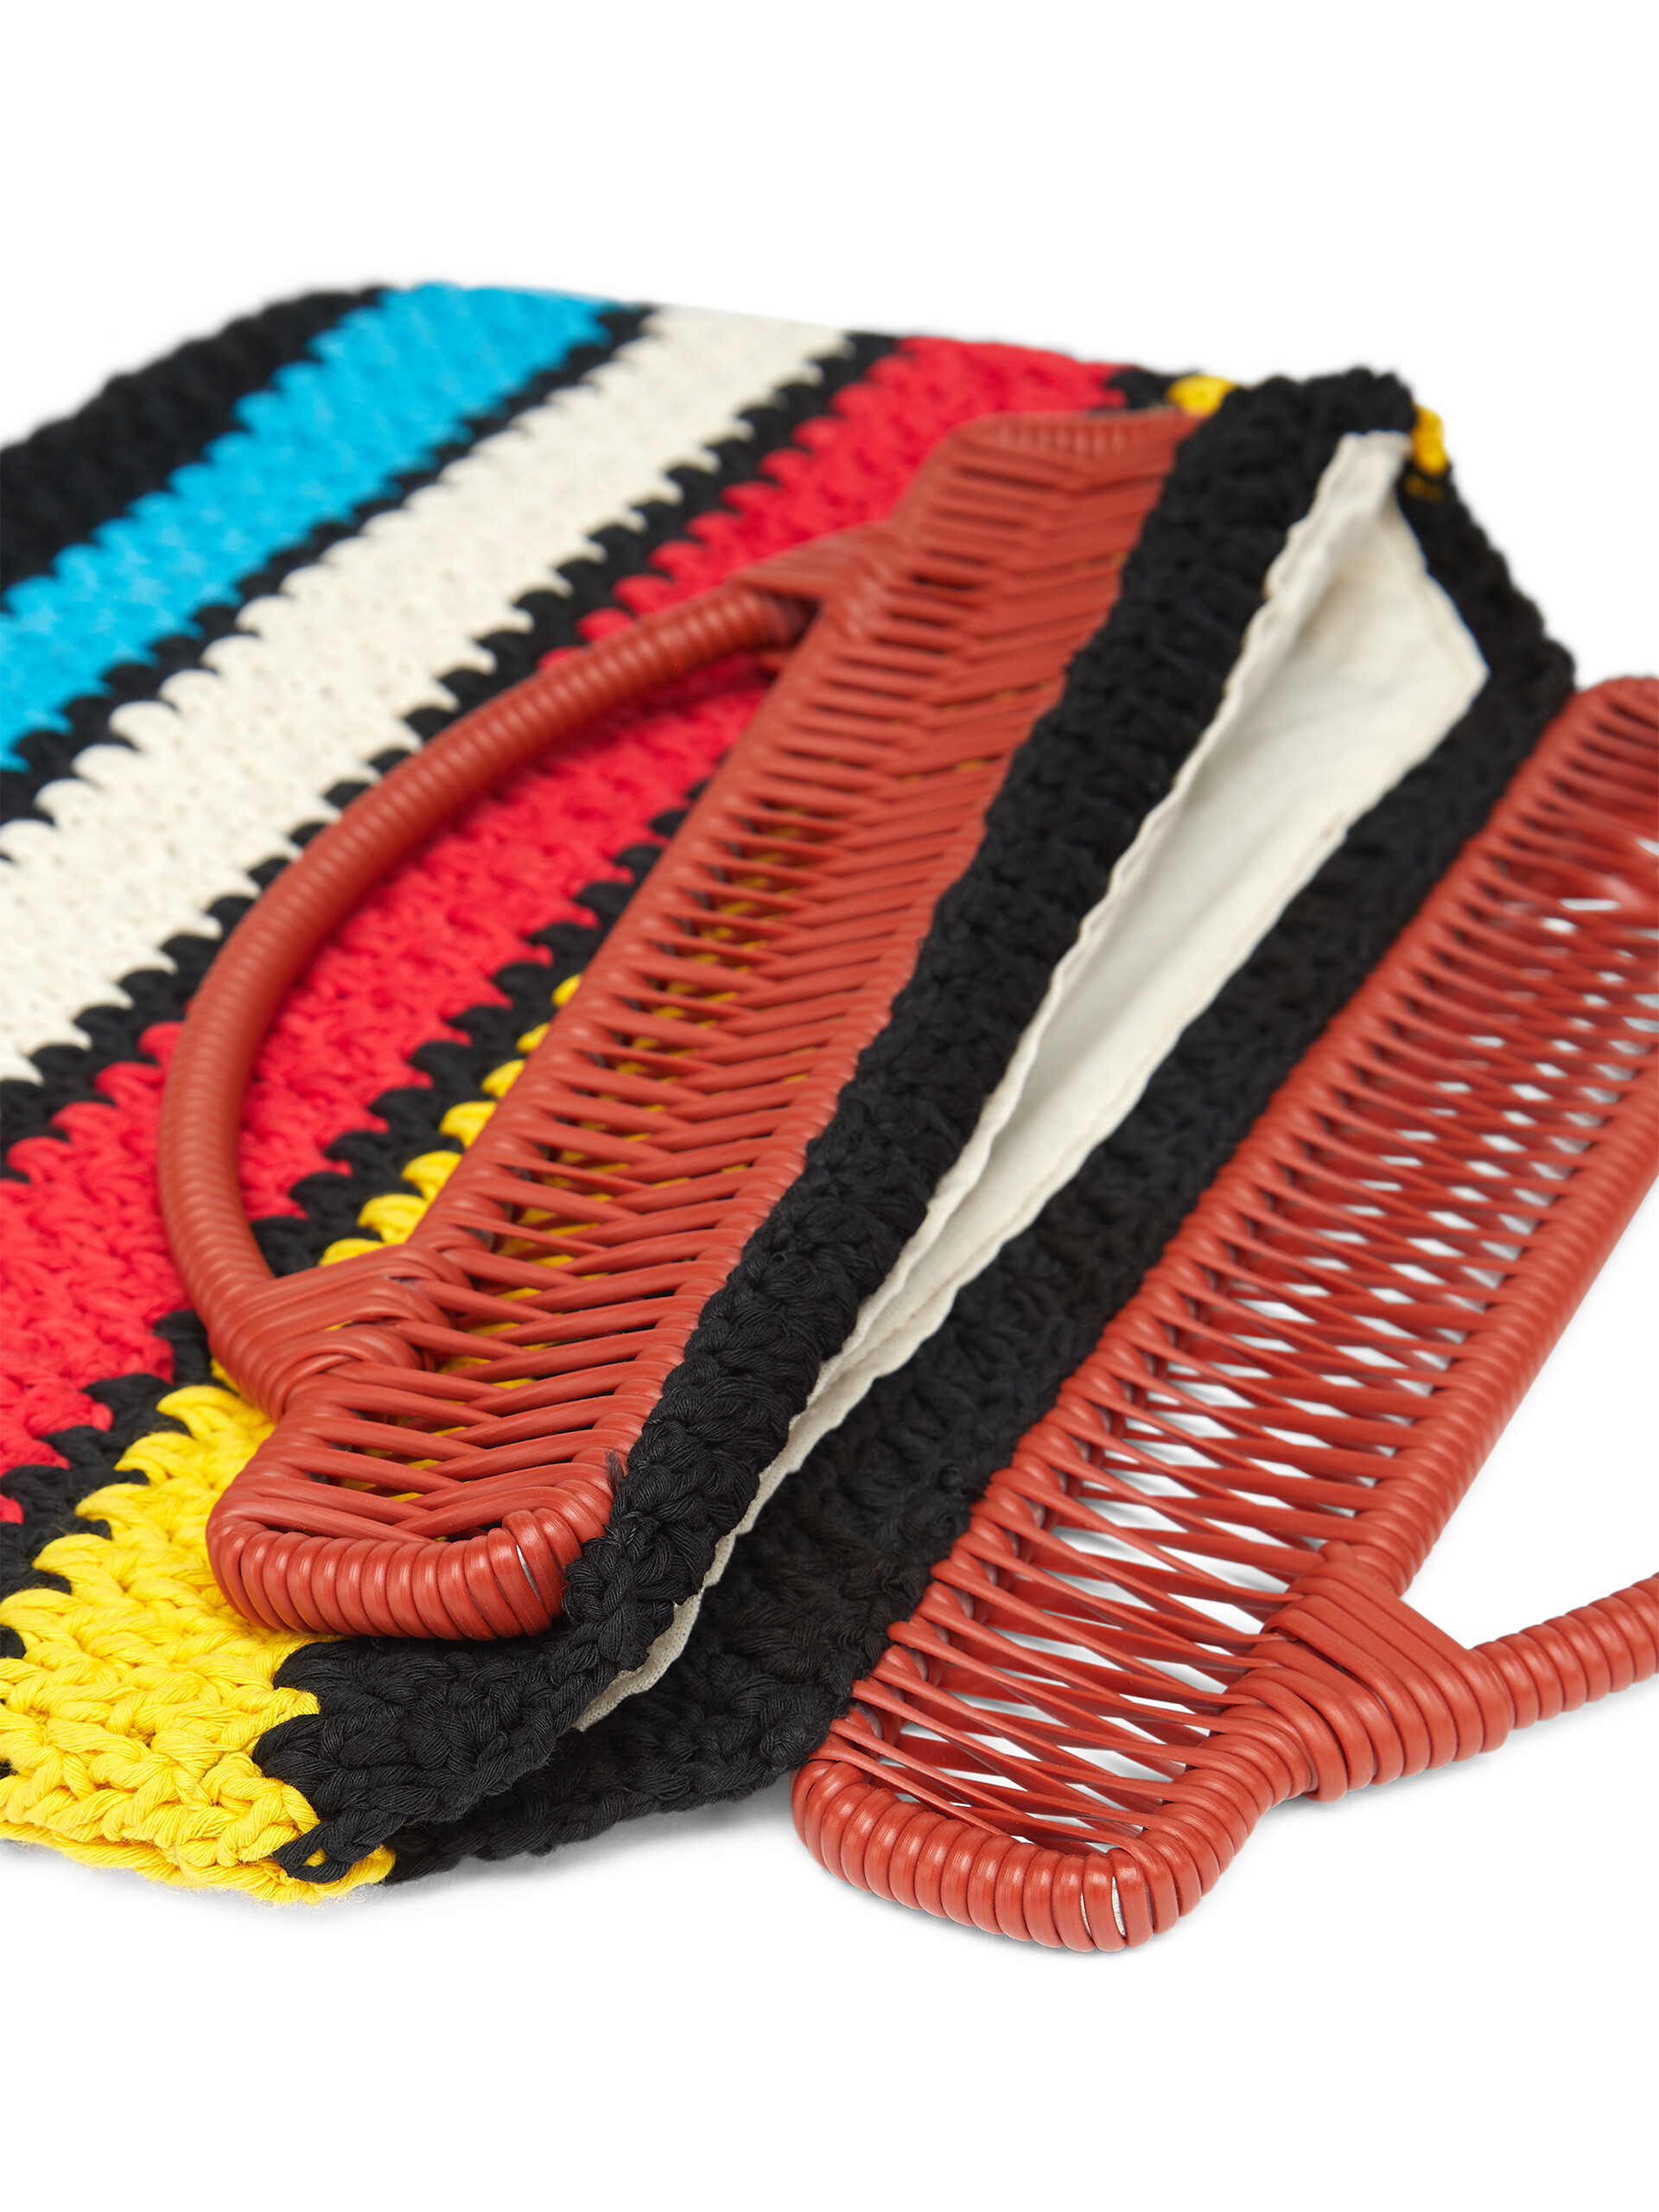 MARNI MARKET frame bag with striped motif in yellow, red, white, pale blue and black crochet cotton blend - Furniture - Image 4